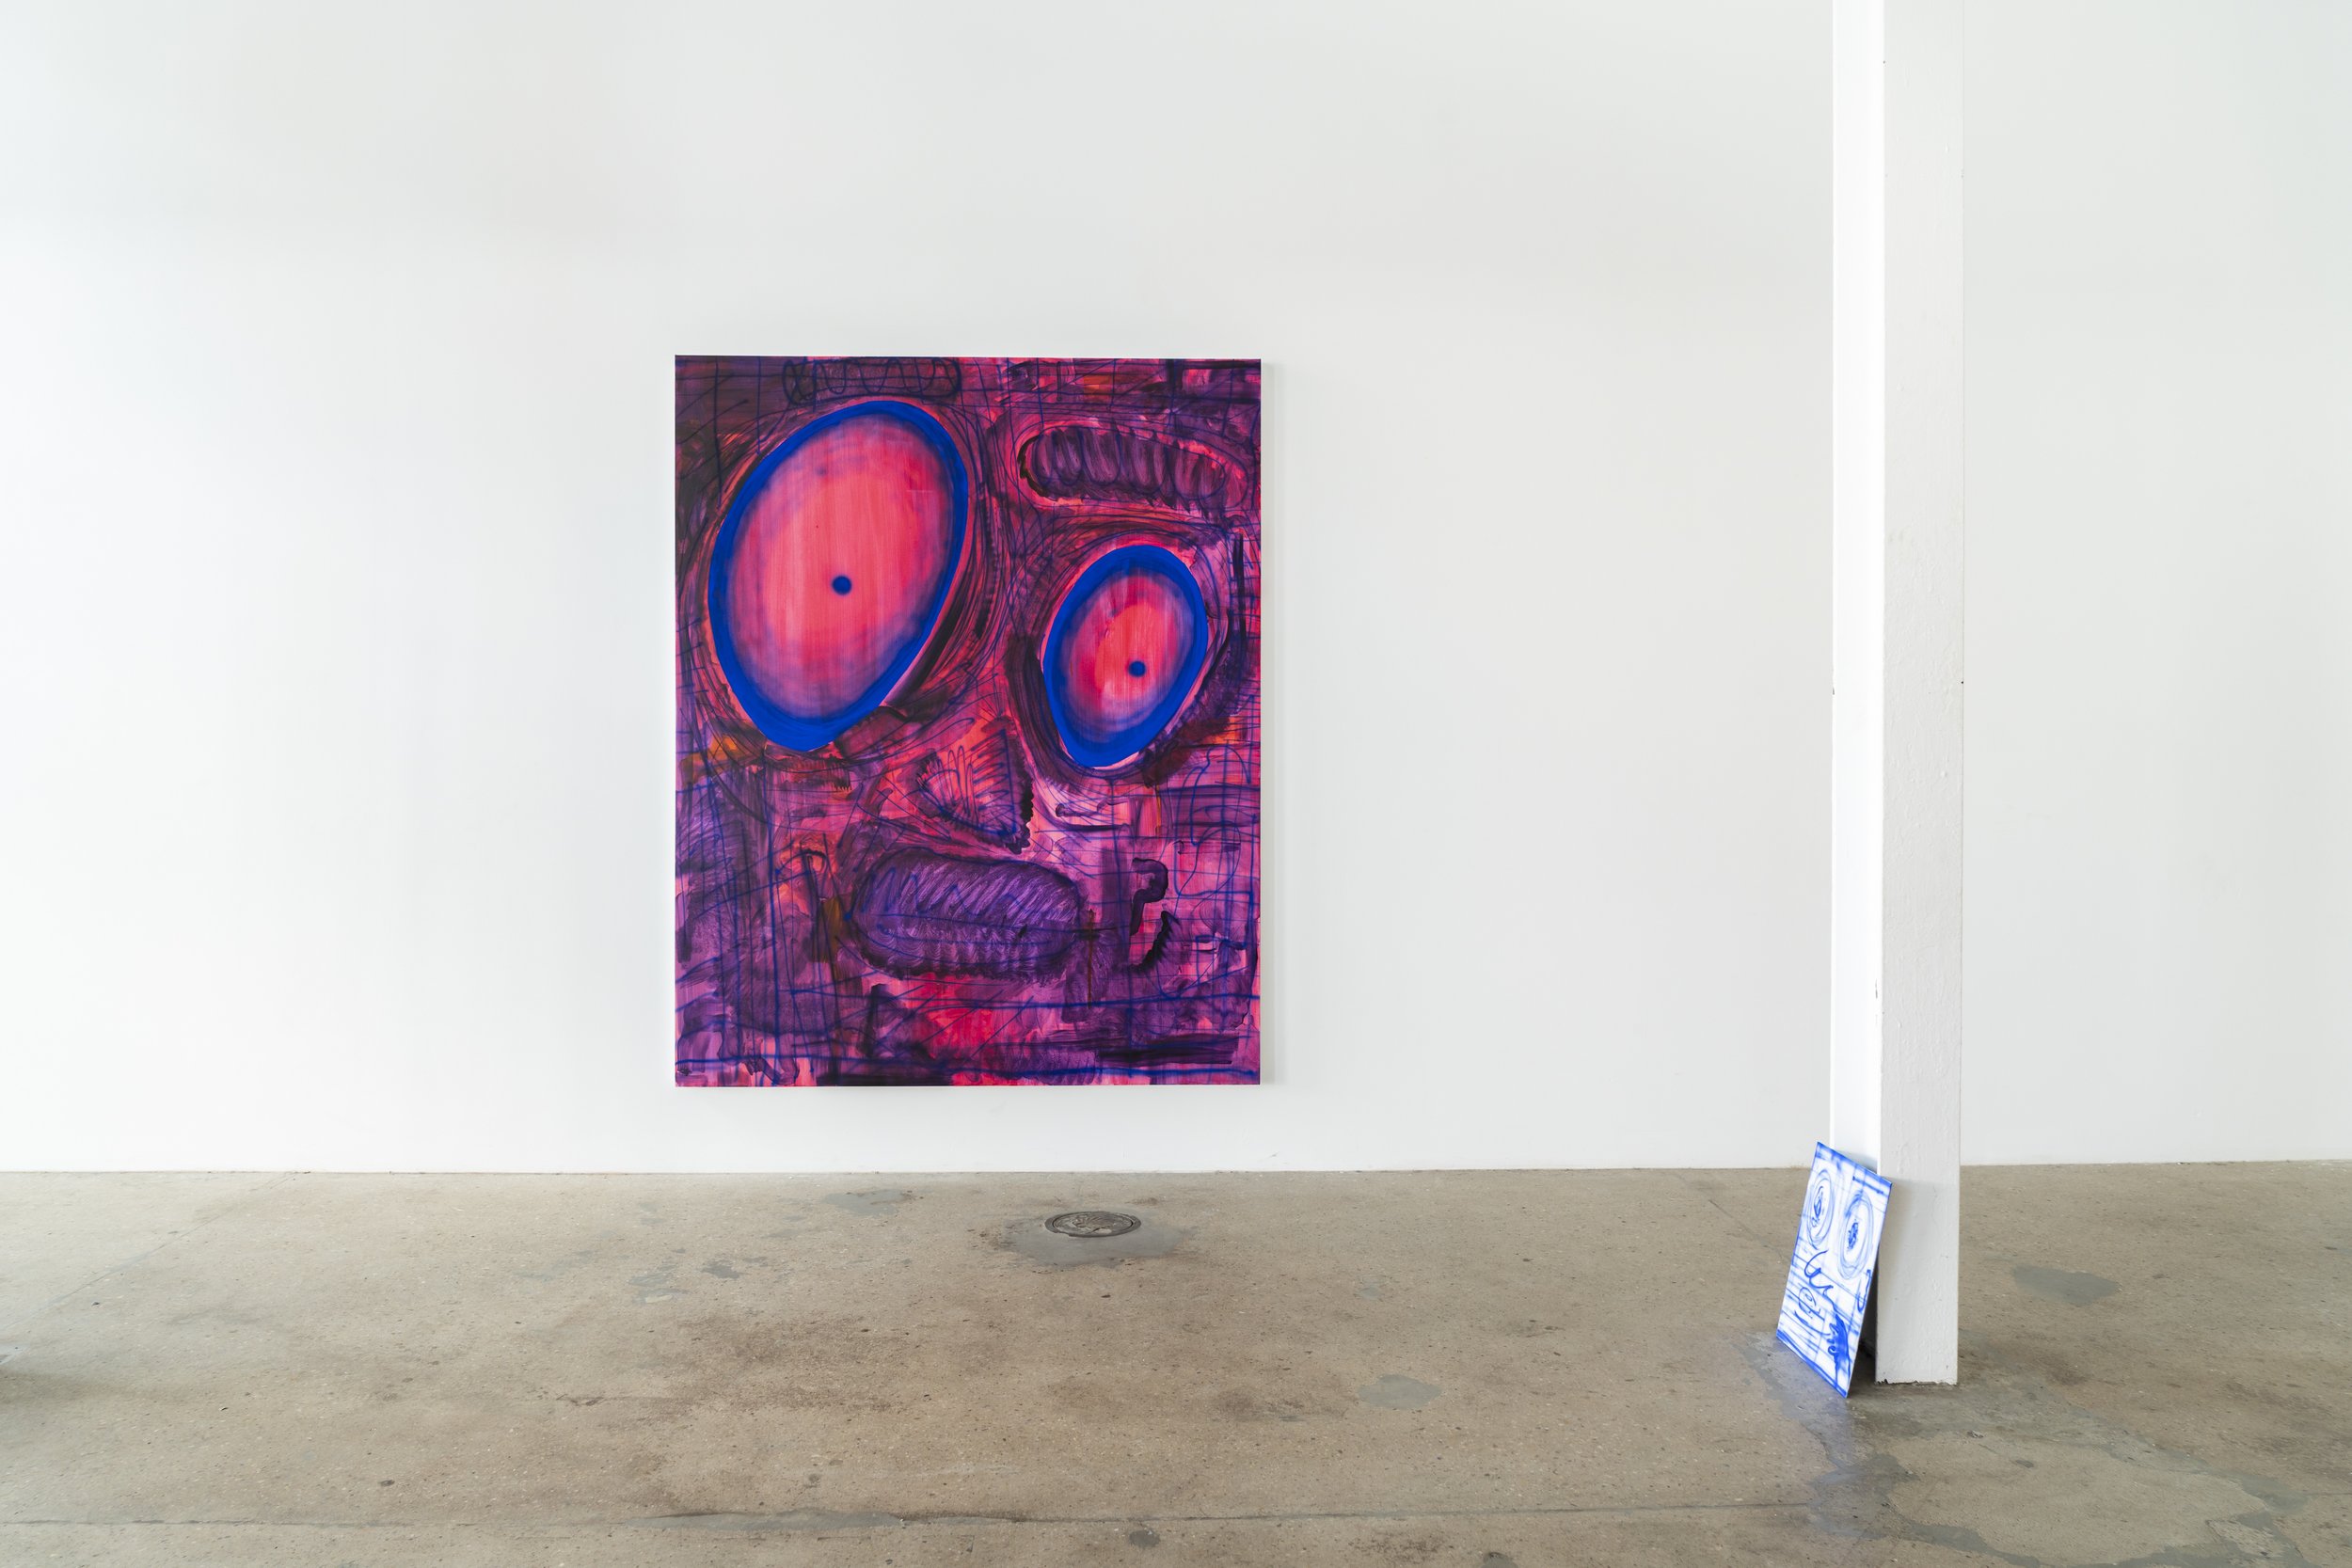  Installation View  Left:  Scrolling endlessly on Reddit , 2022, acrylic and flashe on polycotton, 160cm x 200cm  Right:  Thinking about where did the last hour go? , 2022, acrylic on dibond, 40cm x 30cm.  Photo credit:  Louis Lim  